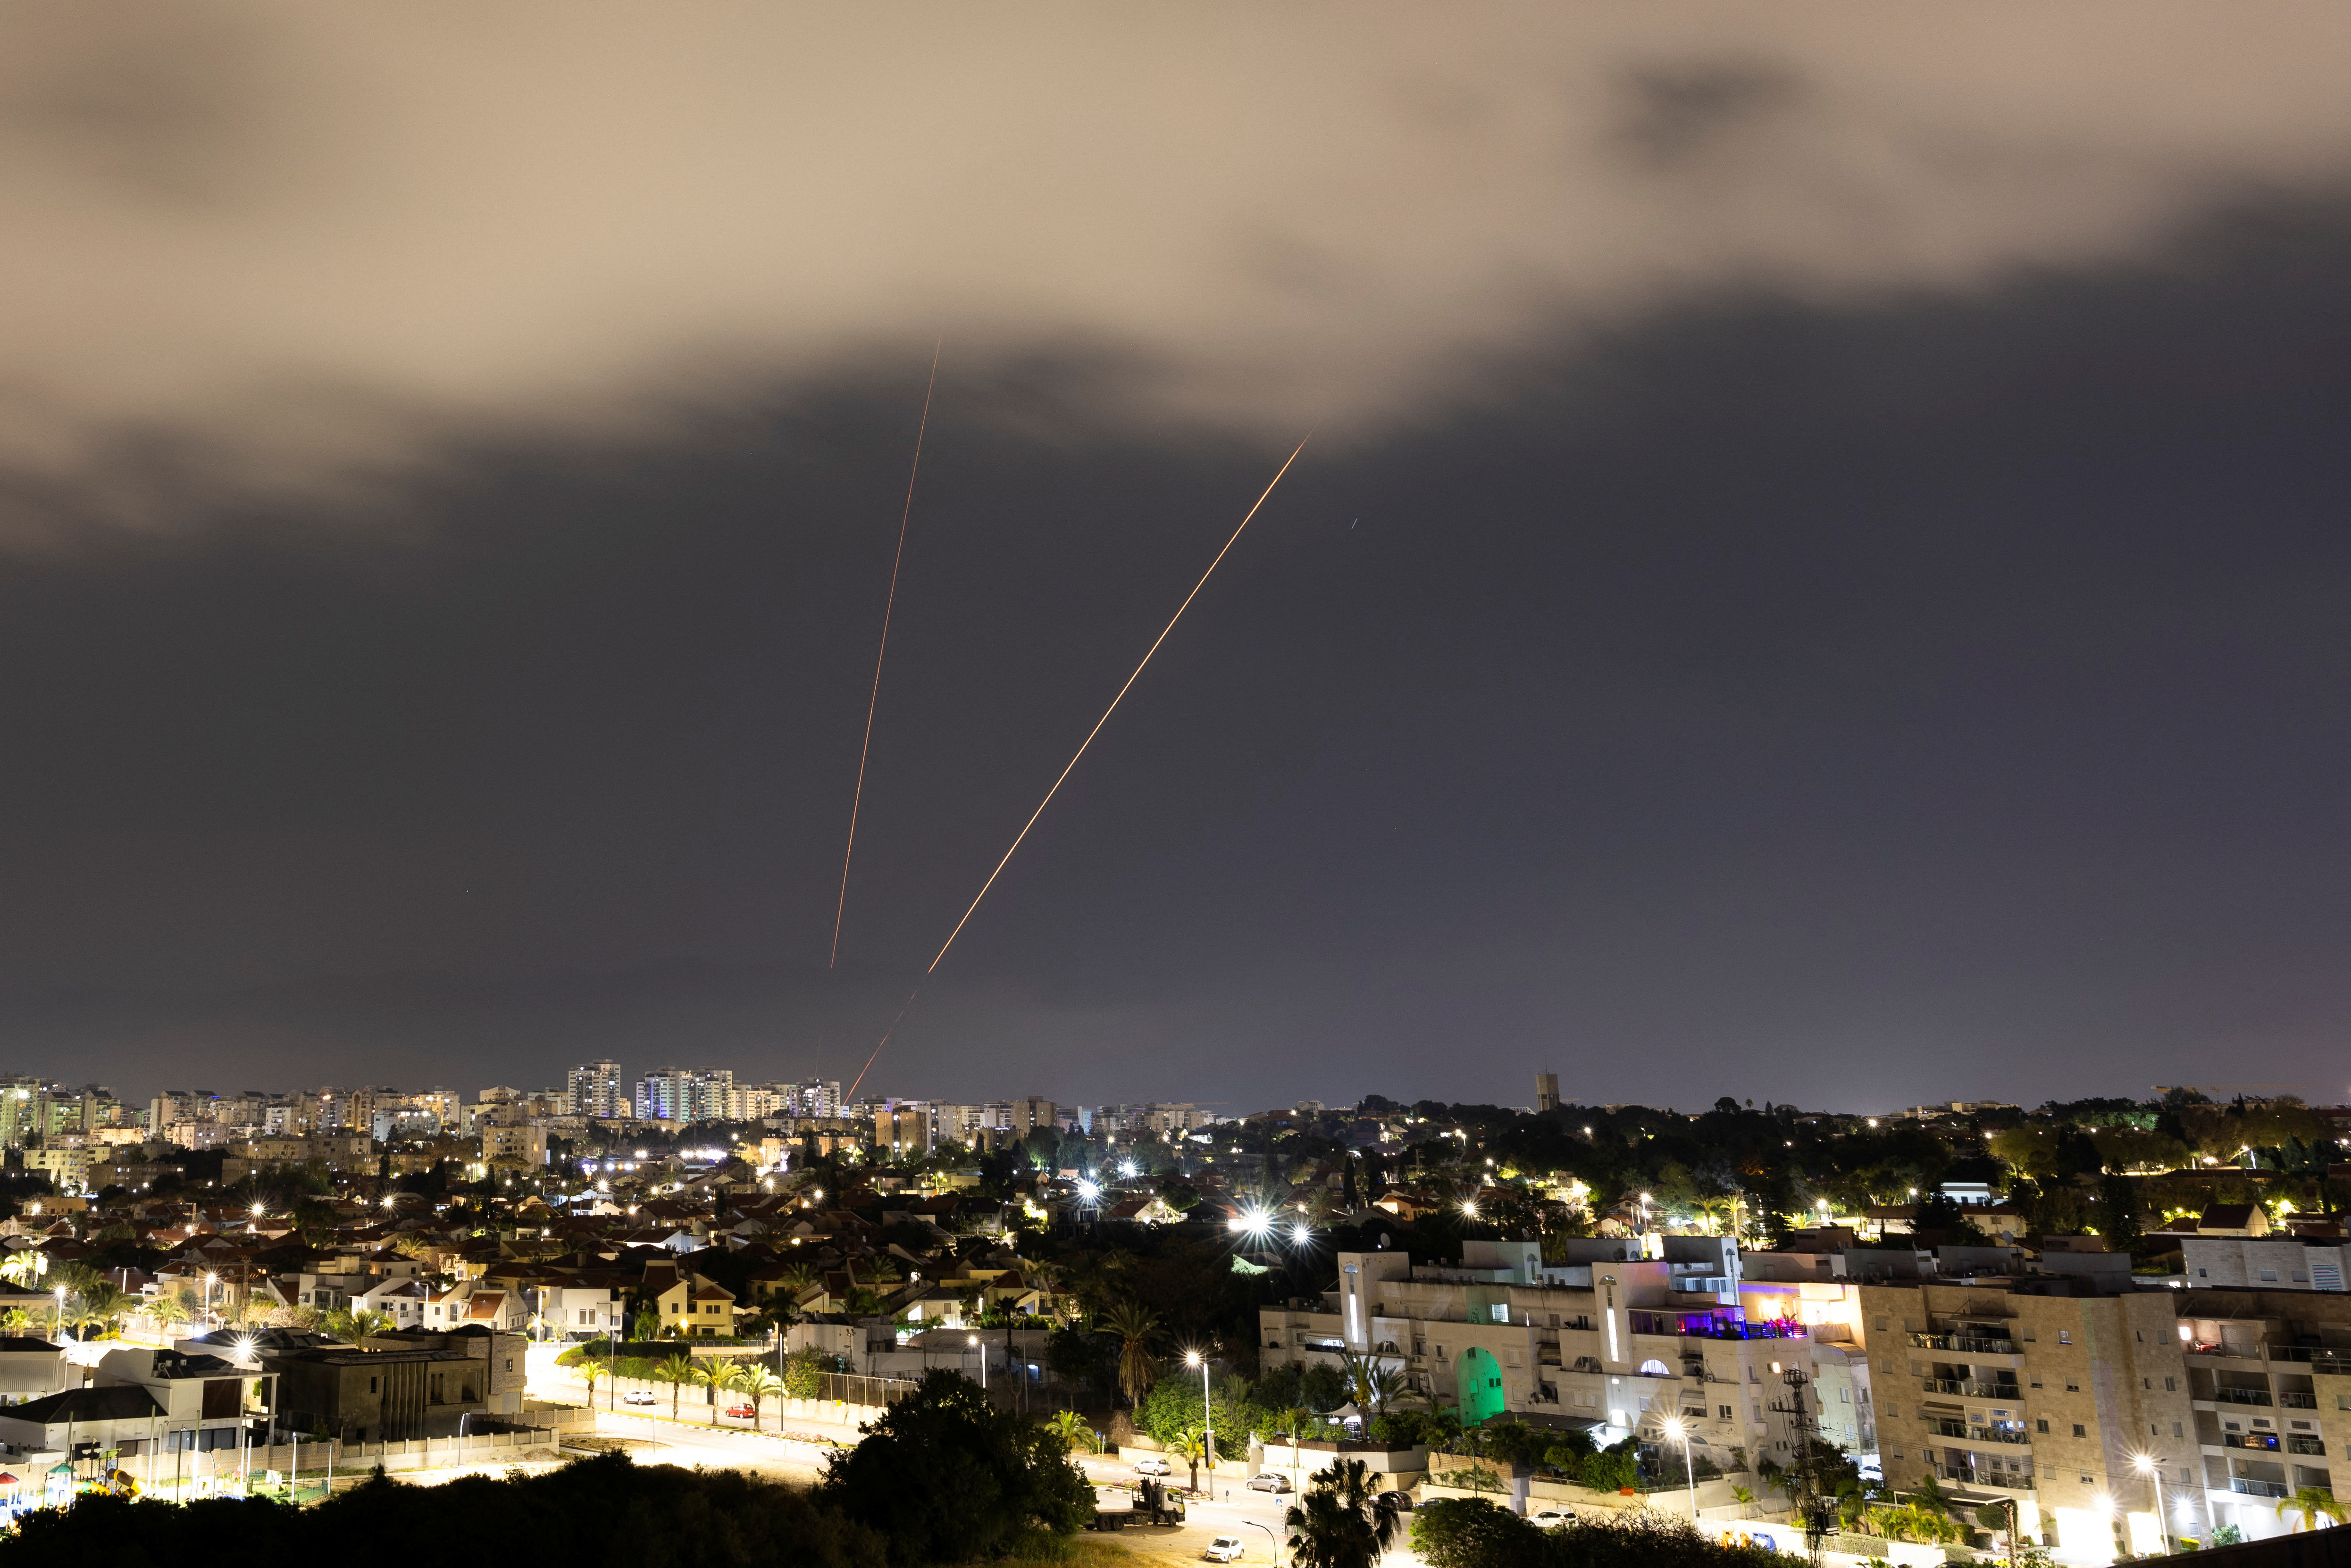 An anti-missile system operates after Iran launched drones and missiles towards Israel, as seen from Ashkelon